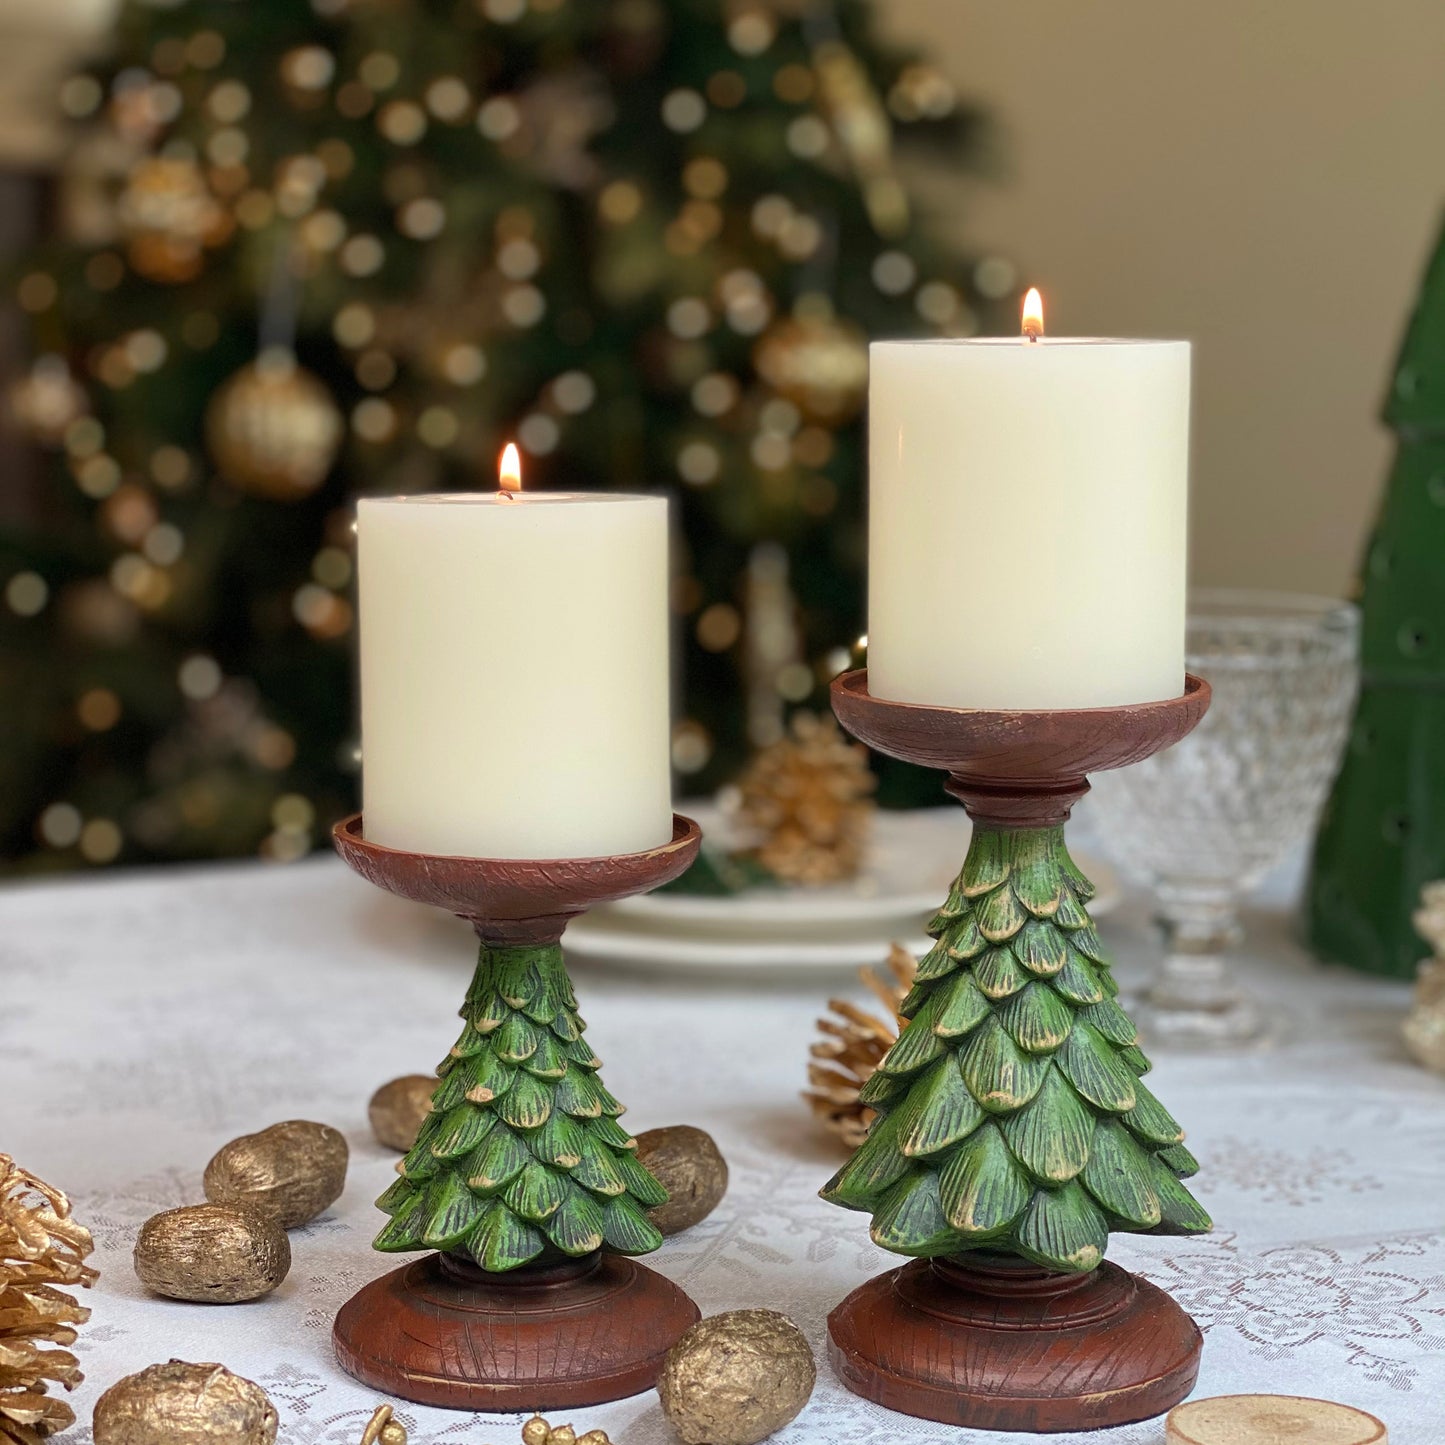 Christmas Tree Candle Holder, Set of 3, Holiday Centerpiece Display, Pine Tree Table decor for winter season autumn